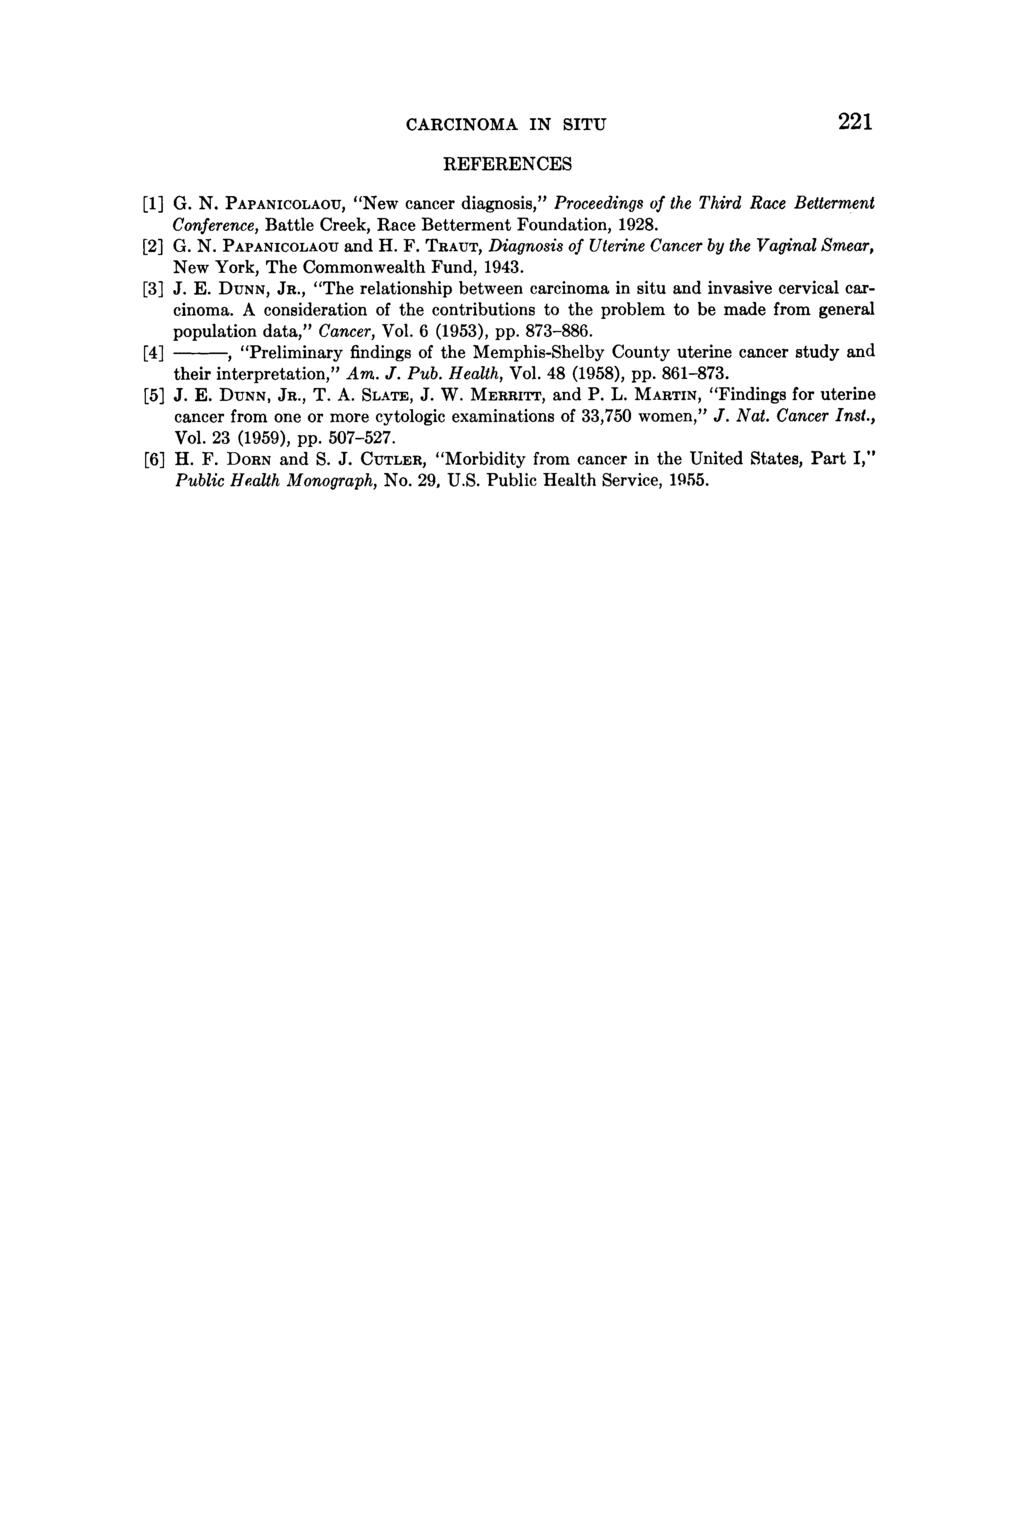 CARCINOMA IN SITU 221 REFERENCES [1] G. N. PAPANICOLAOU, "New cancer diagnosis," Proceedings of the Third Race Betterment Conference, Battle Creek, Race Betterment Foundation, 1928. [2] G. N. PAPANICOLAOU and H.